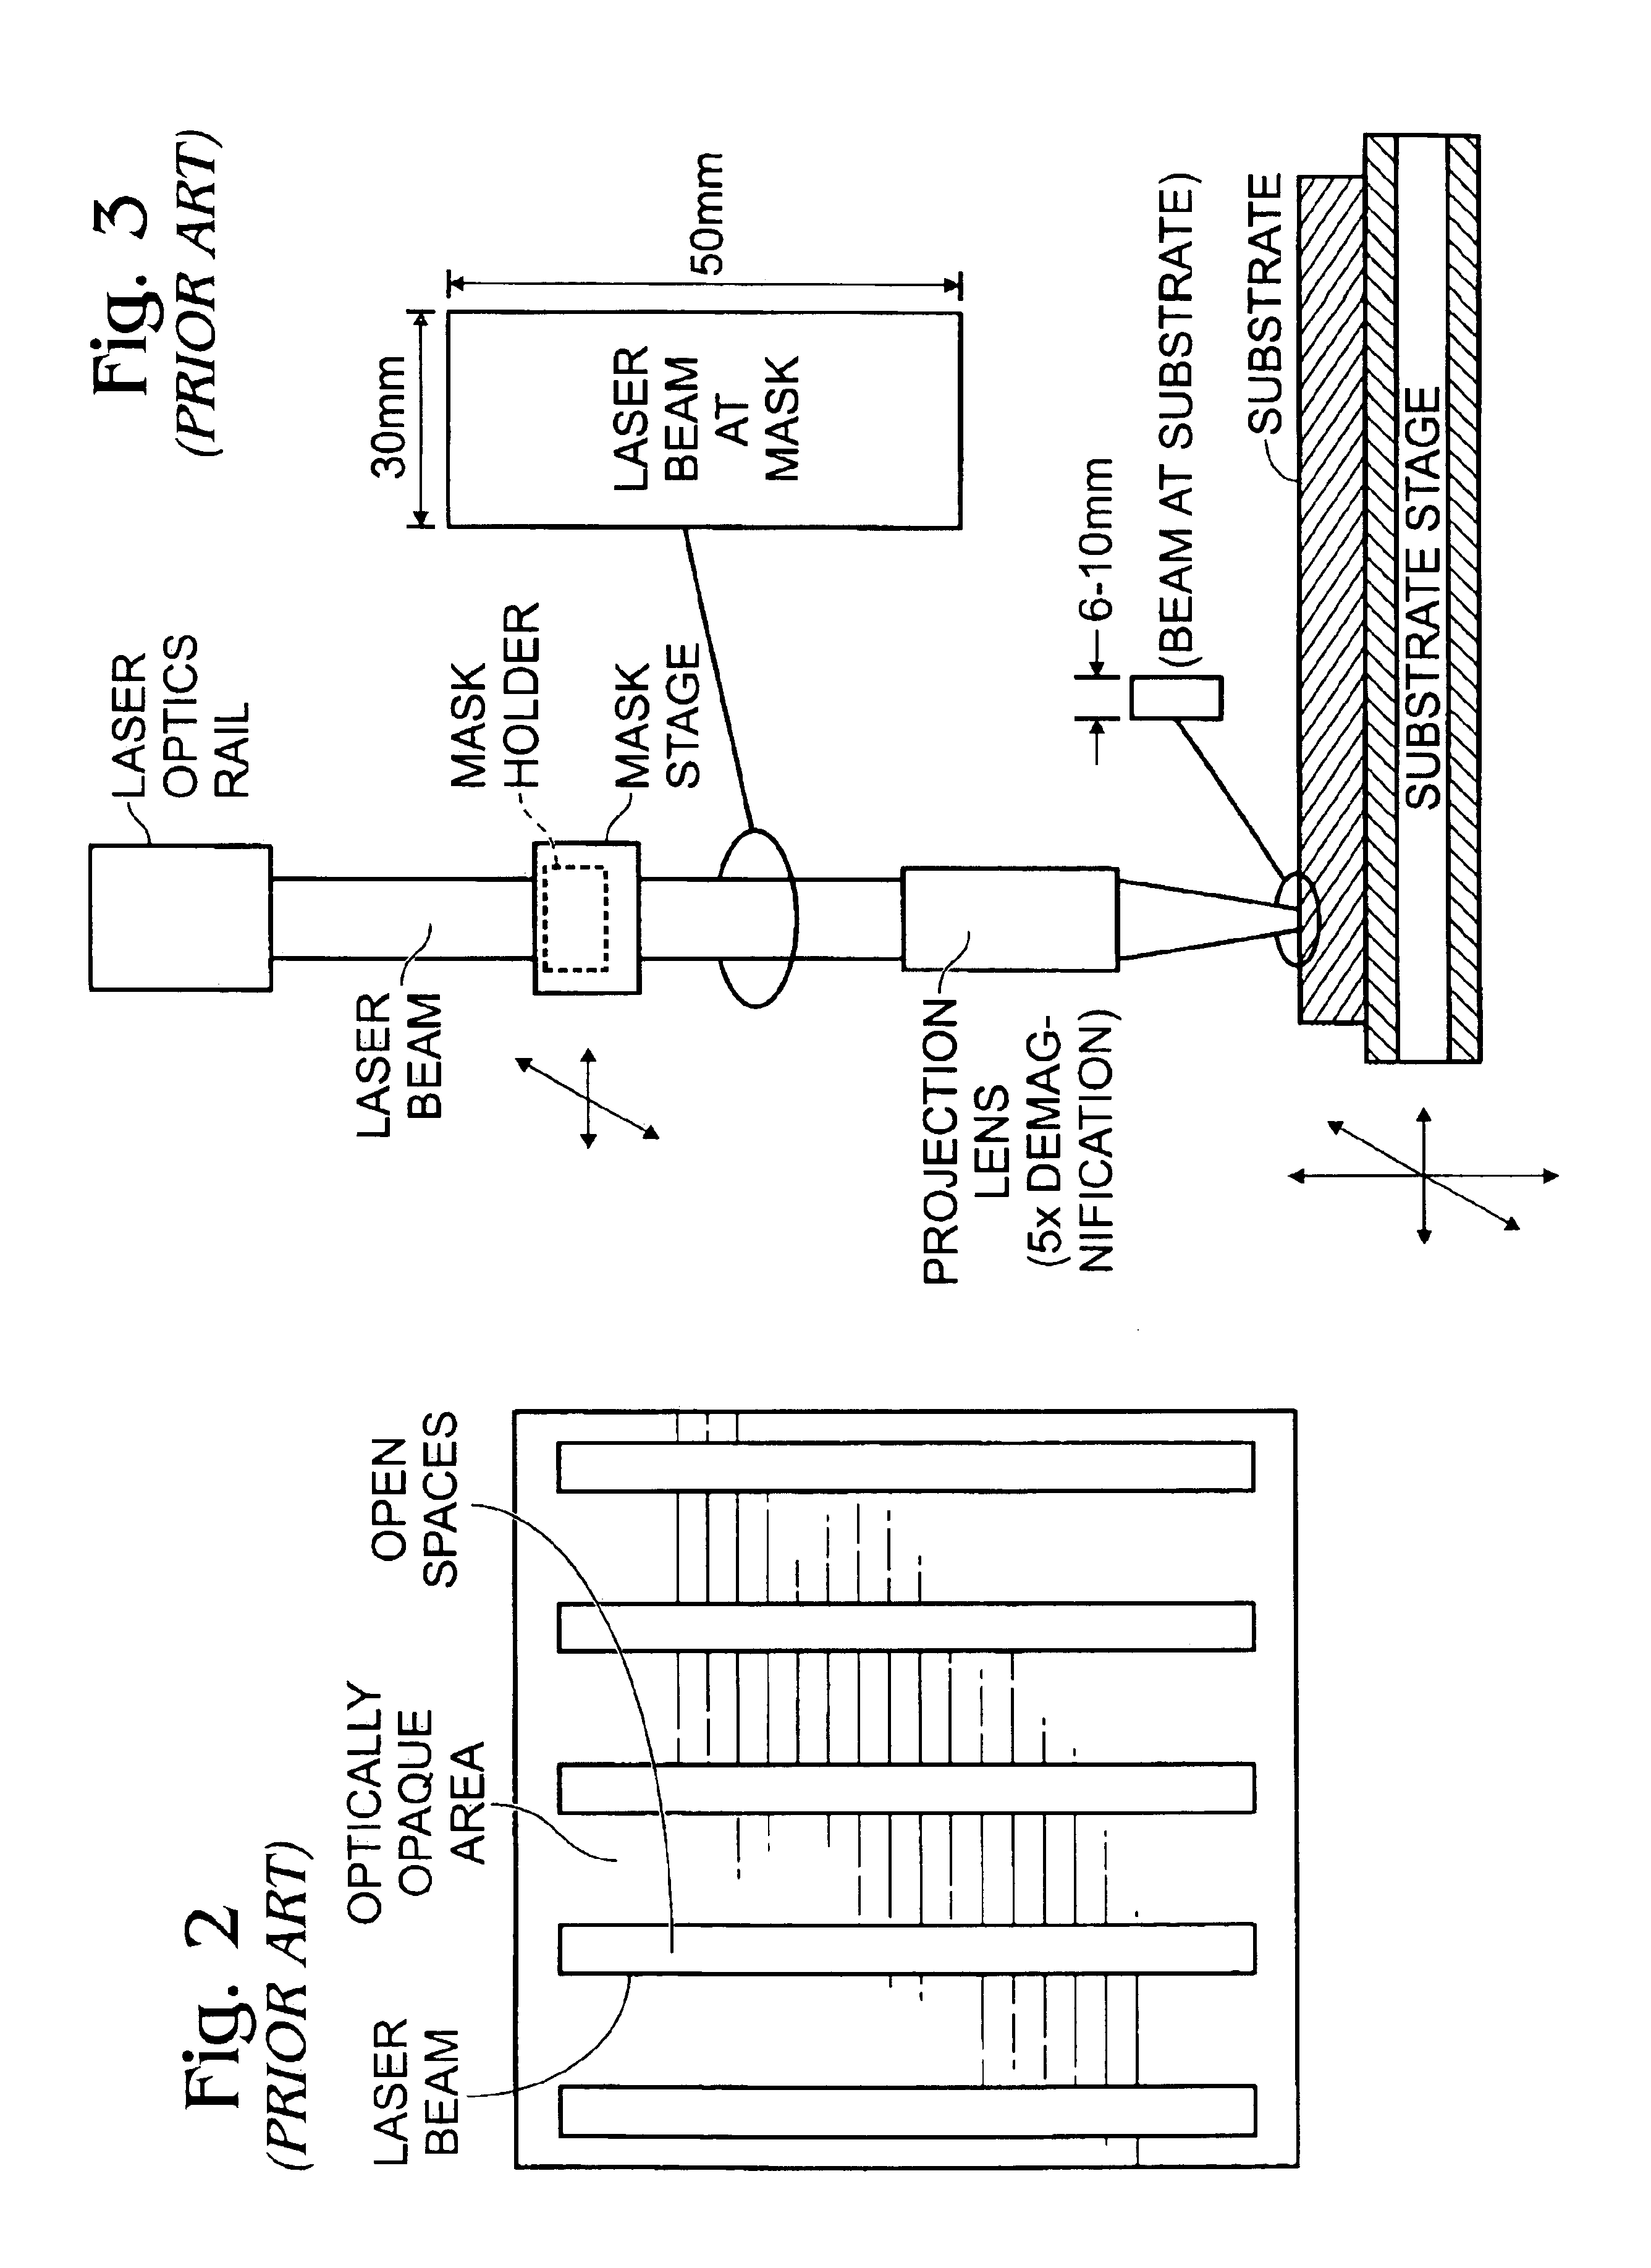 Variable quality semiconductor film substrate